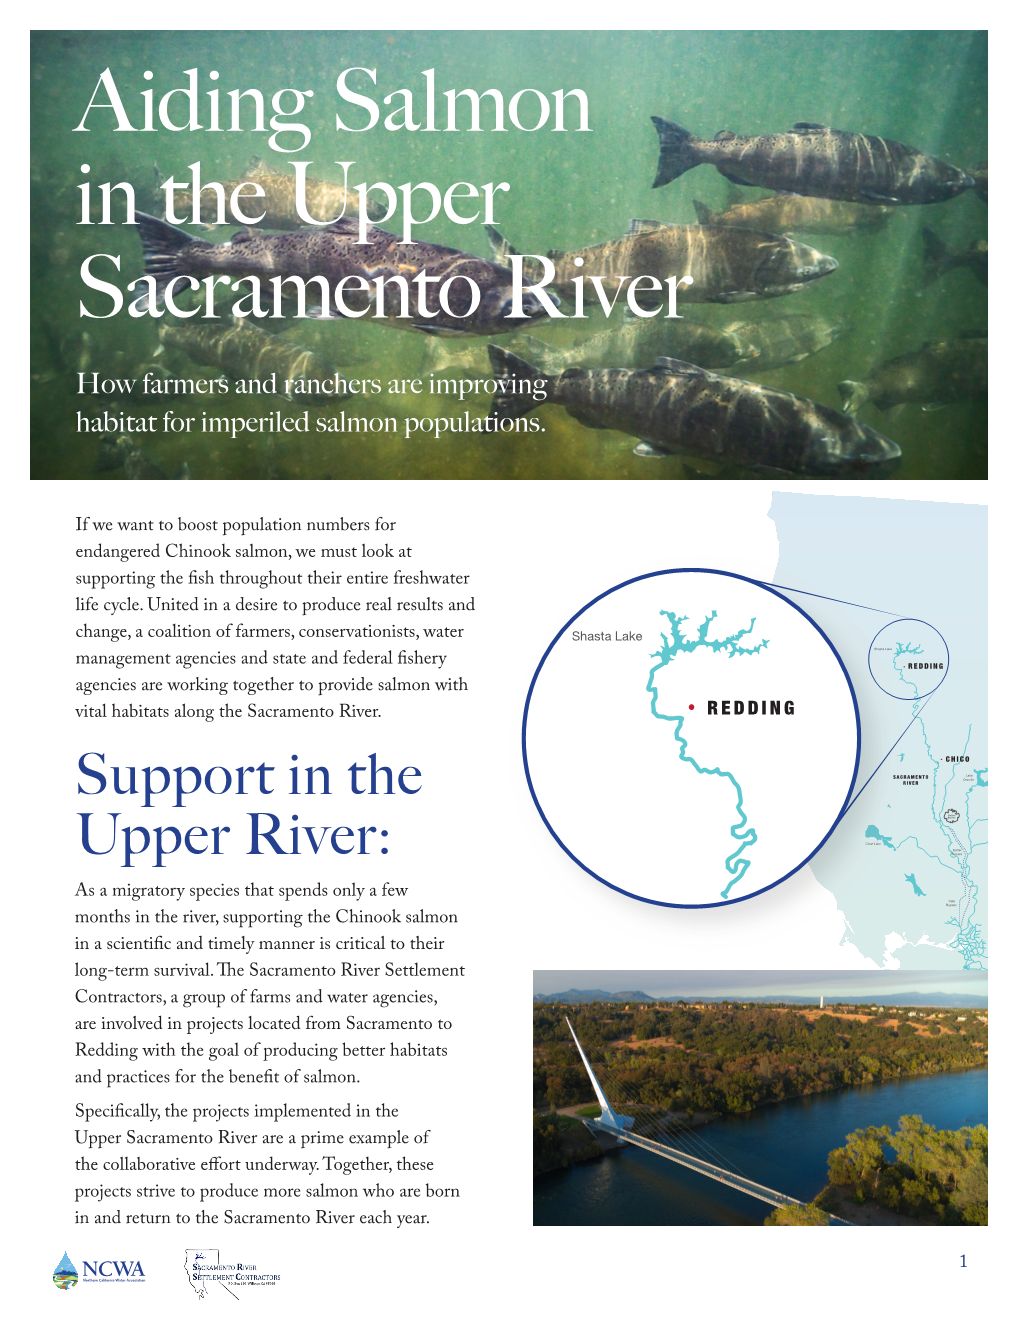 Aiding Salmon in the Upper Sacramento River How Farmers and Ranchers Are Improving Habitat for Imperiled Salmon Populations